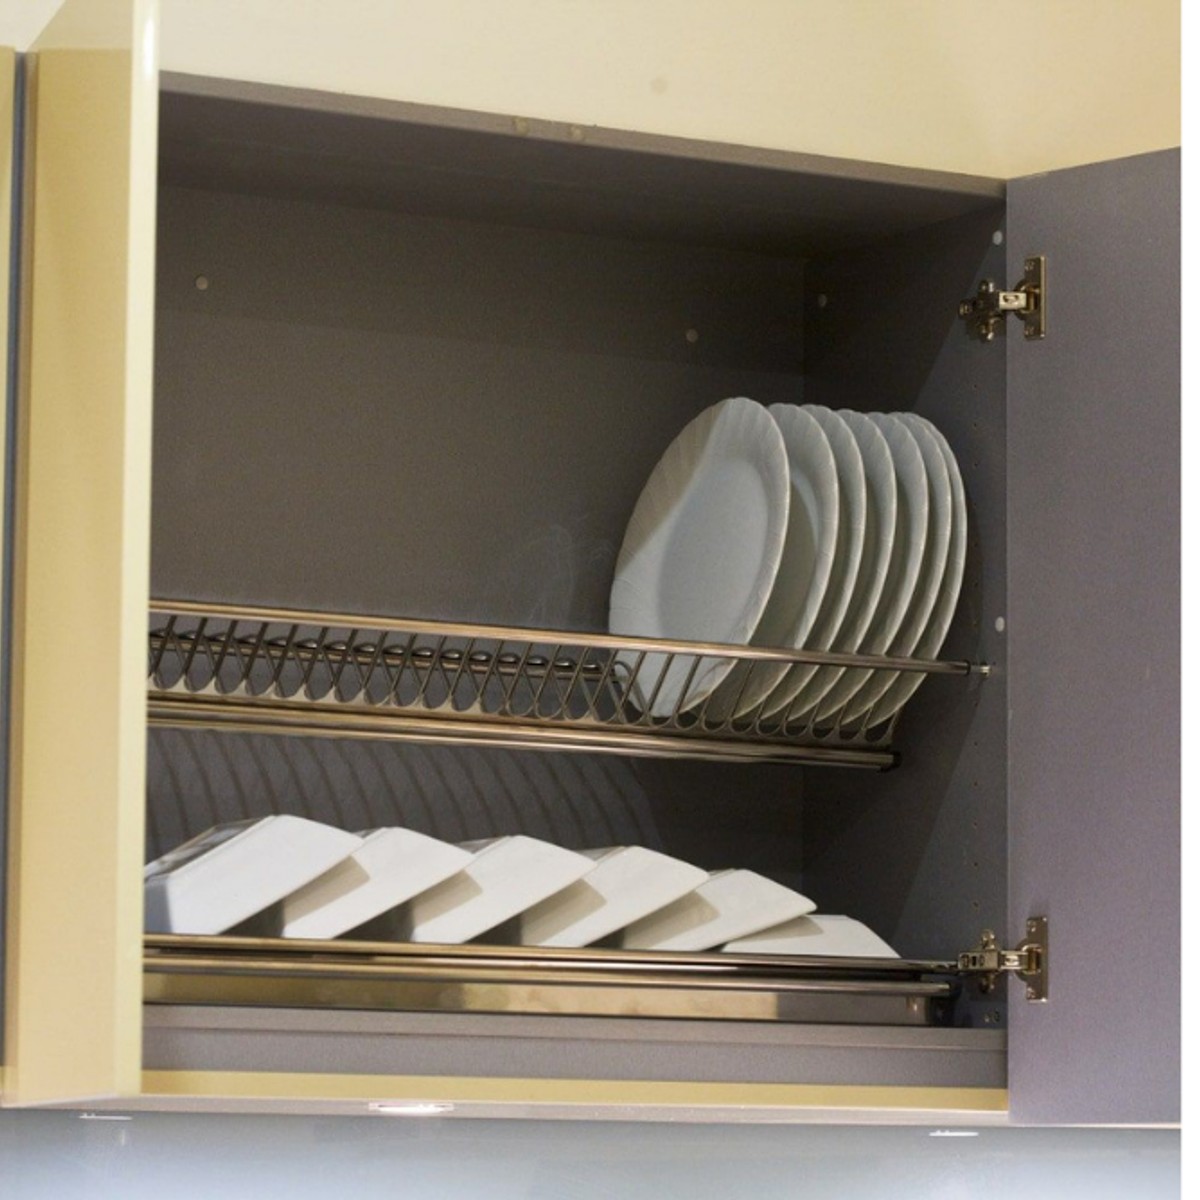 Kitchen design: get the dish rack off the counter. - VICTORIA